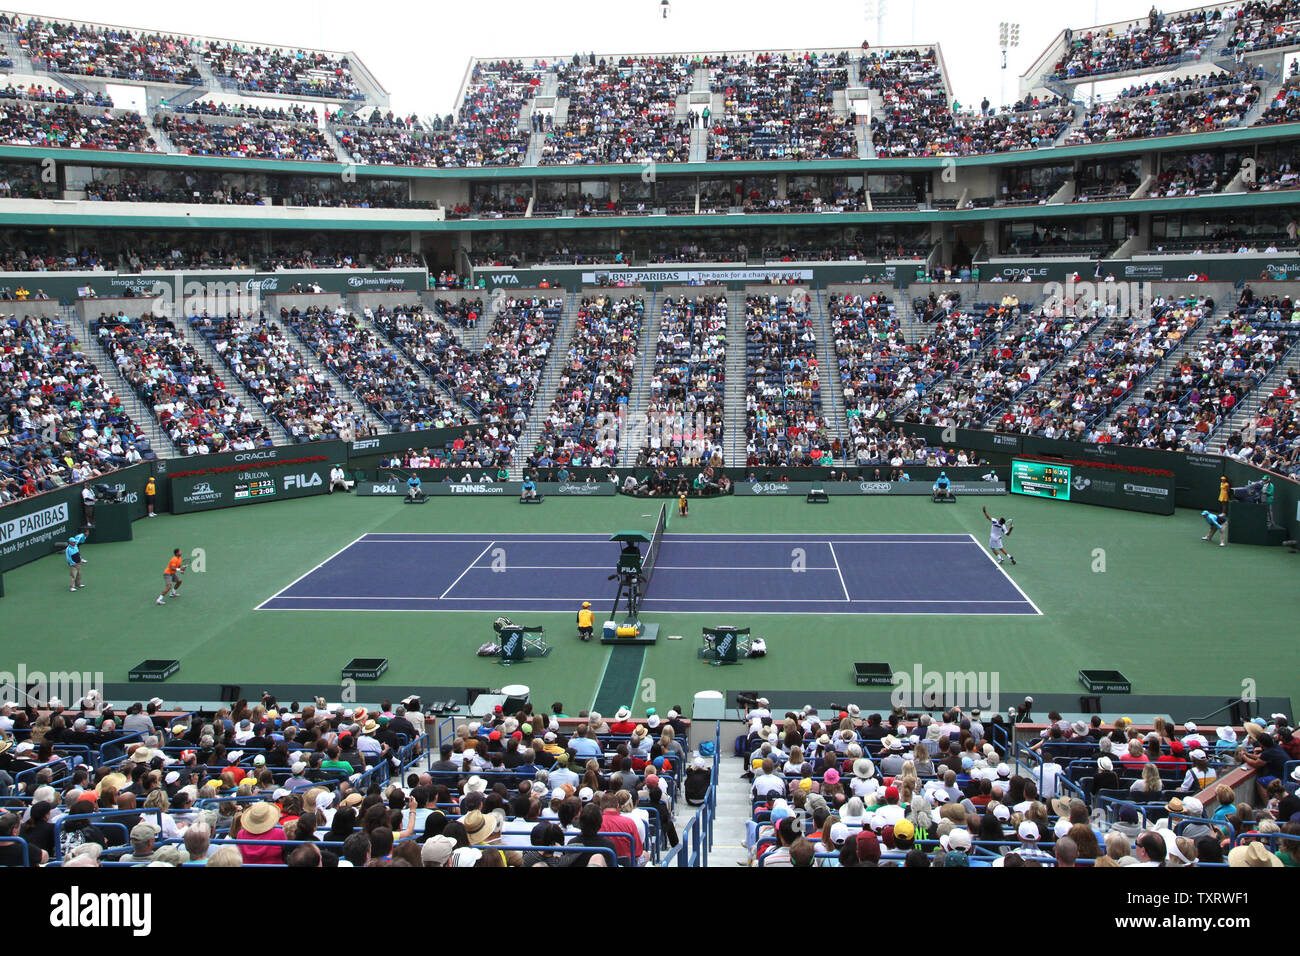 Center court is seen during the mens final match between Spaniard Rafael Nadal and Serbian Novak Djokovic at the BNP Paribas Open in Indian Wells, California on March 20, 2011.  Djokovic defeated Nadal 4-6, 6-3, 6-2 to win the tournament.   UPI/David Silpa Stock Photo